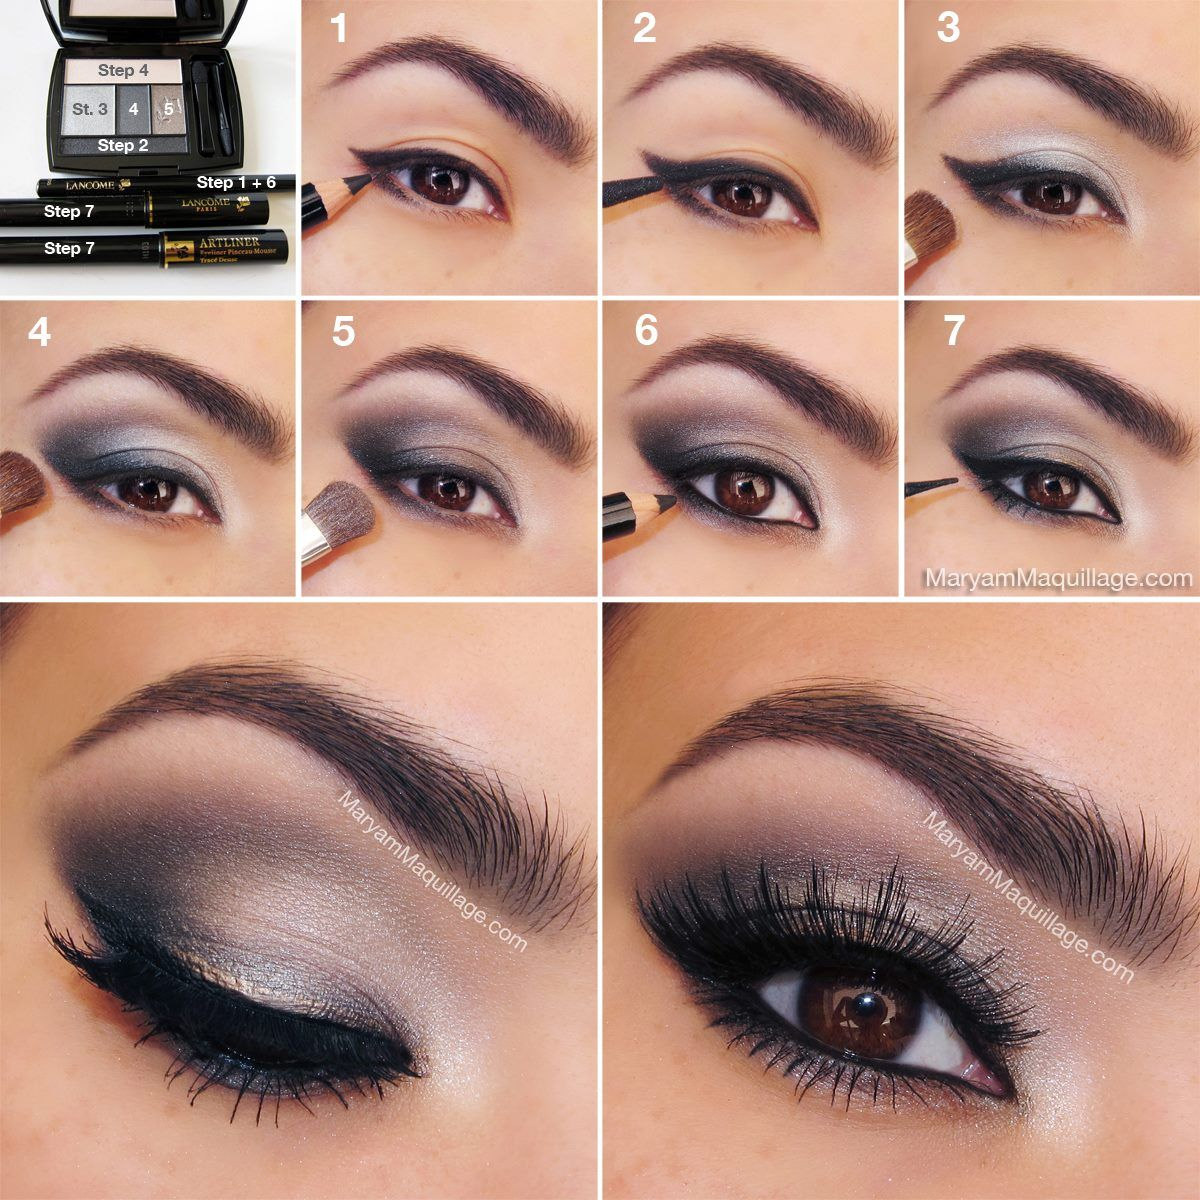 Eye Makeup Step By Step Instructions With Pictures Easy Eye Makeup Tutorial Pictures Photos And Images For Facebook